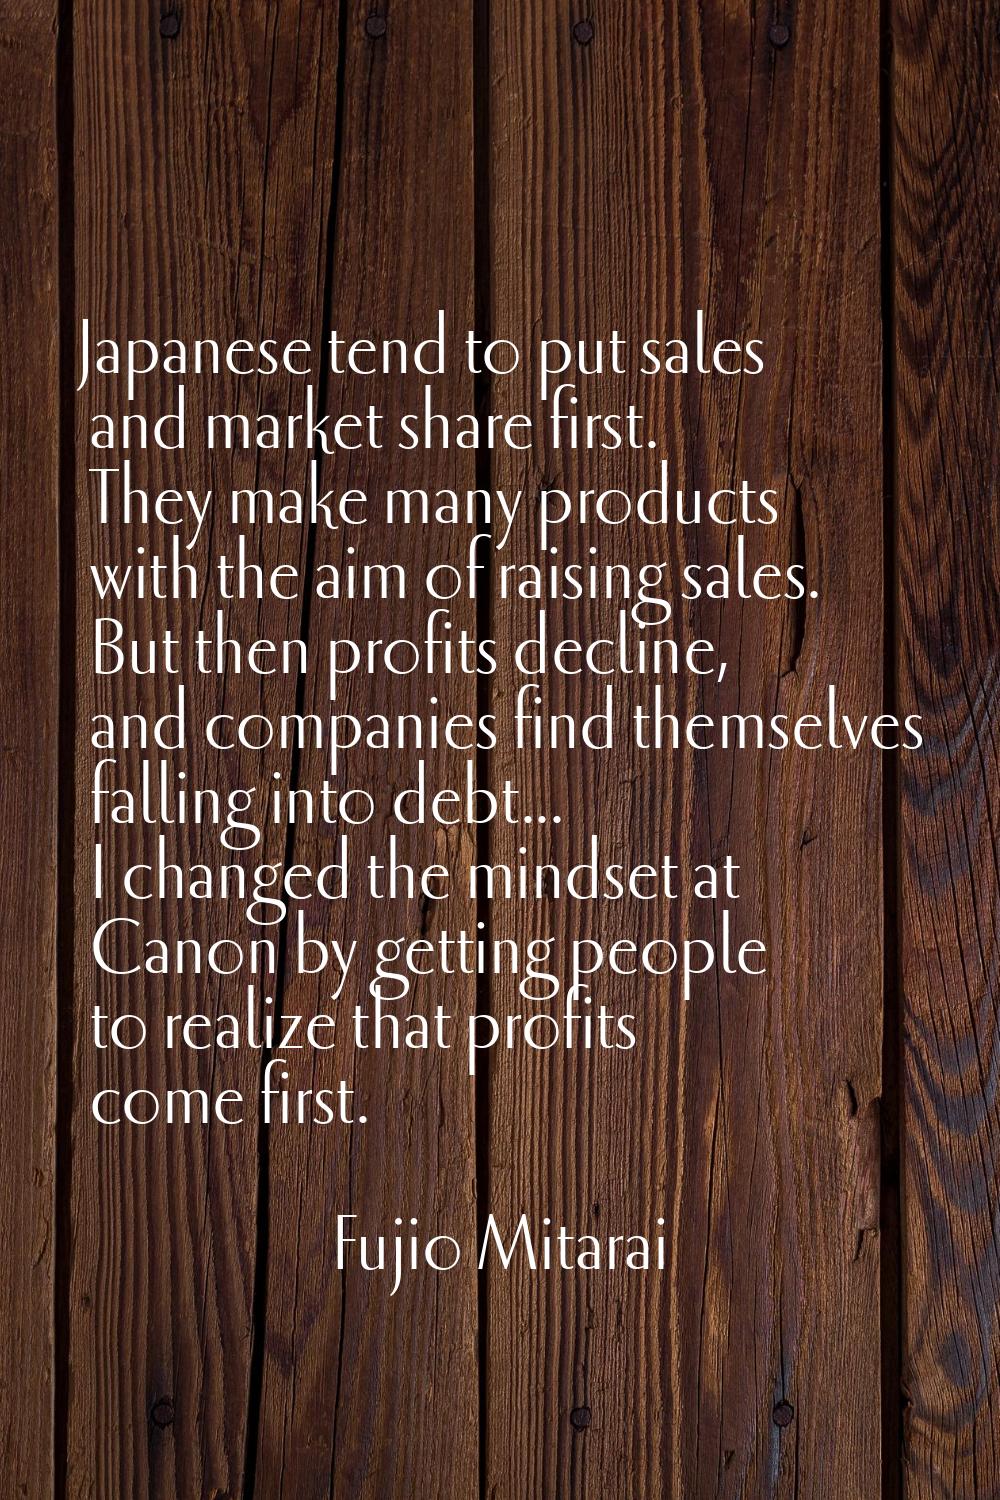 Japanese tend to put sales and market share first. They make many products with the aim of raising 